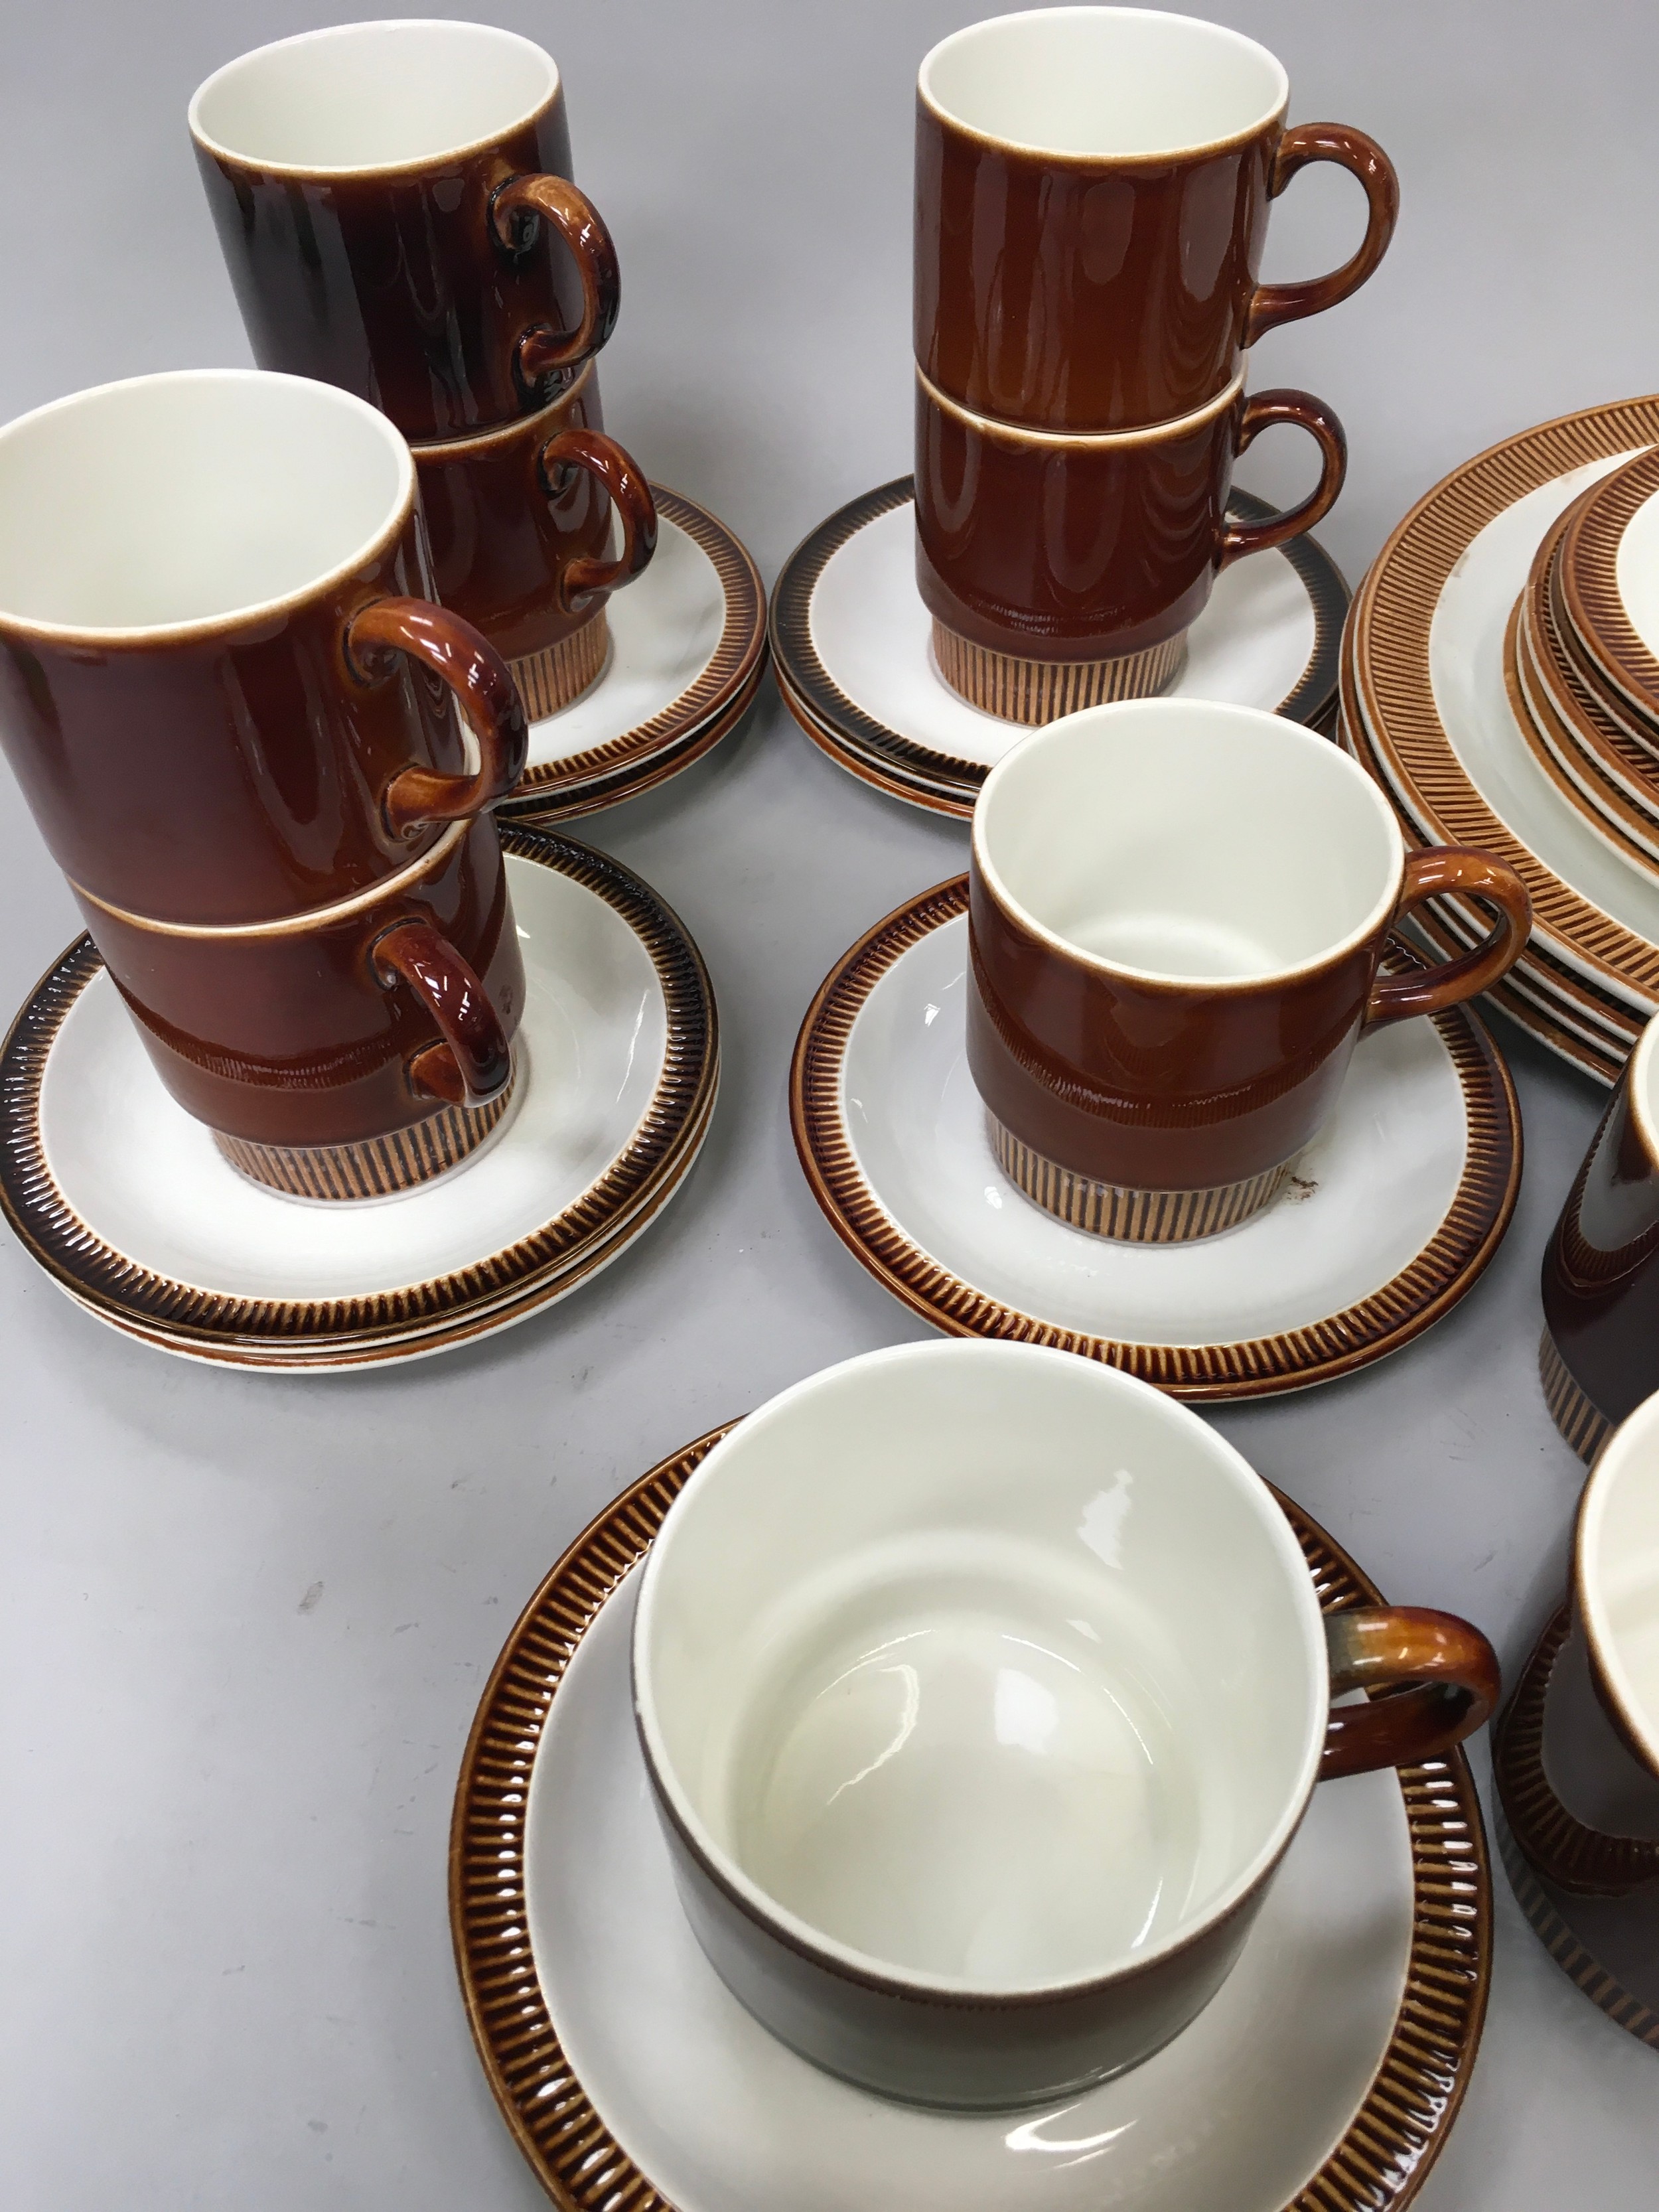 Poole pottery collection of ?Chestnut Brown? dinnerware approx 50 pieces. - Image 2 of 5